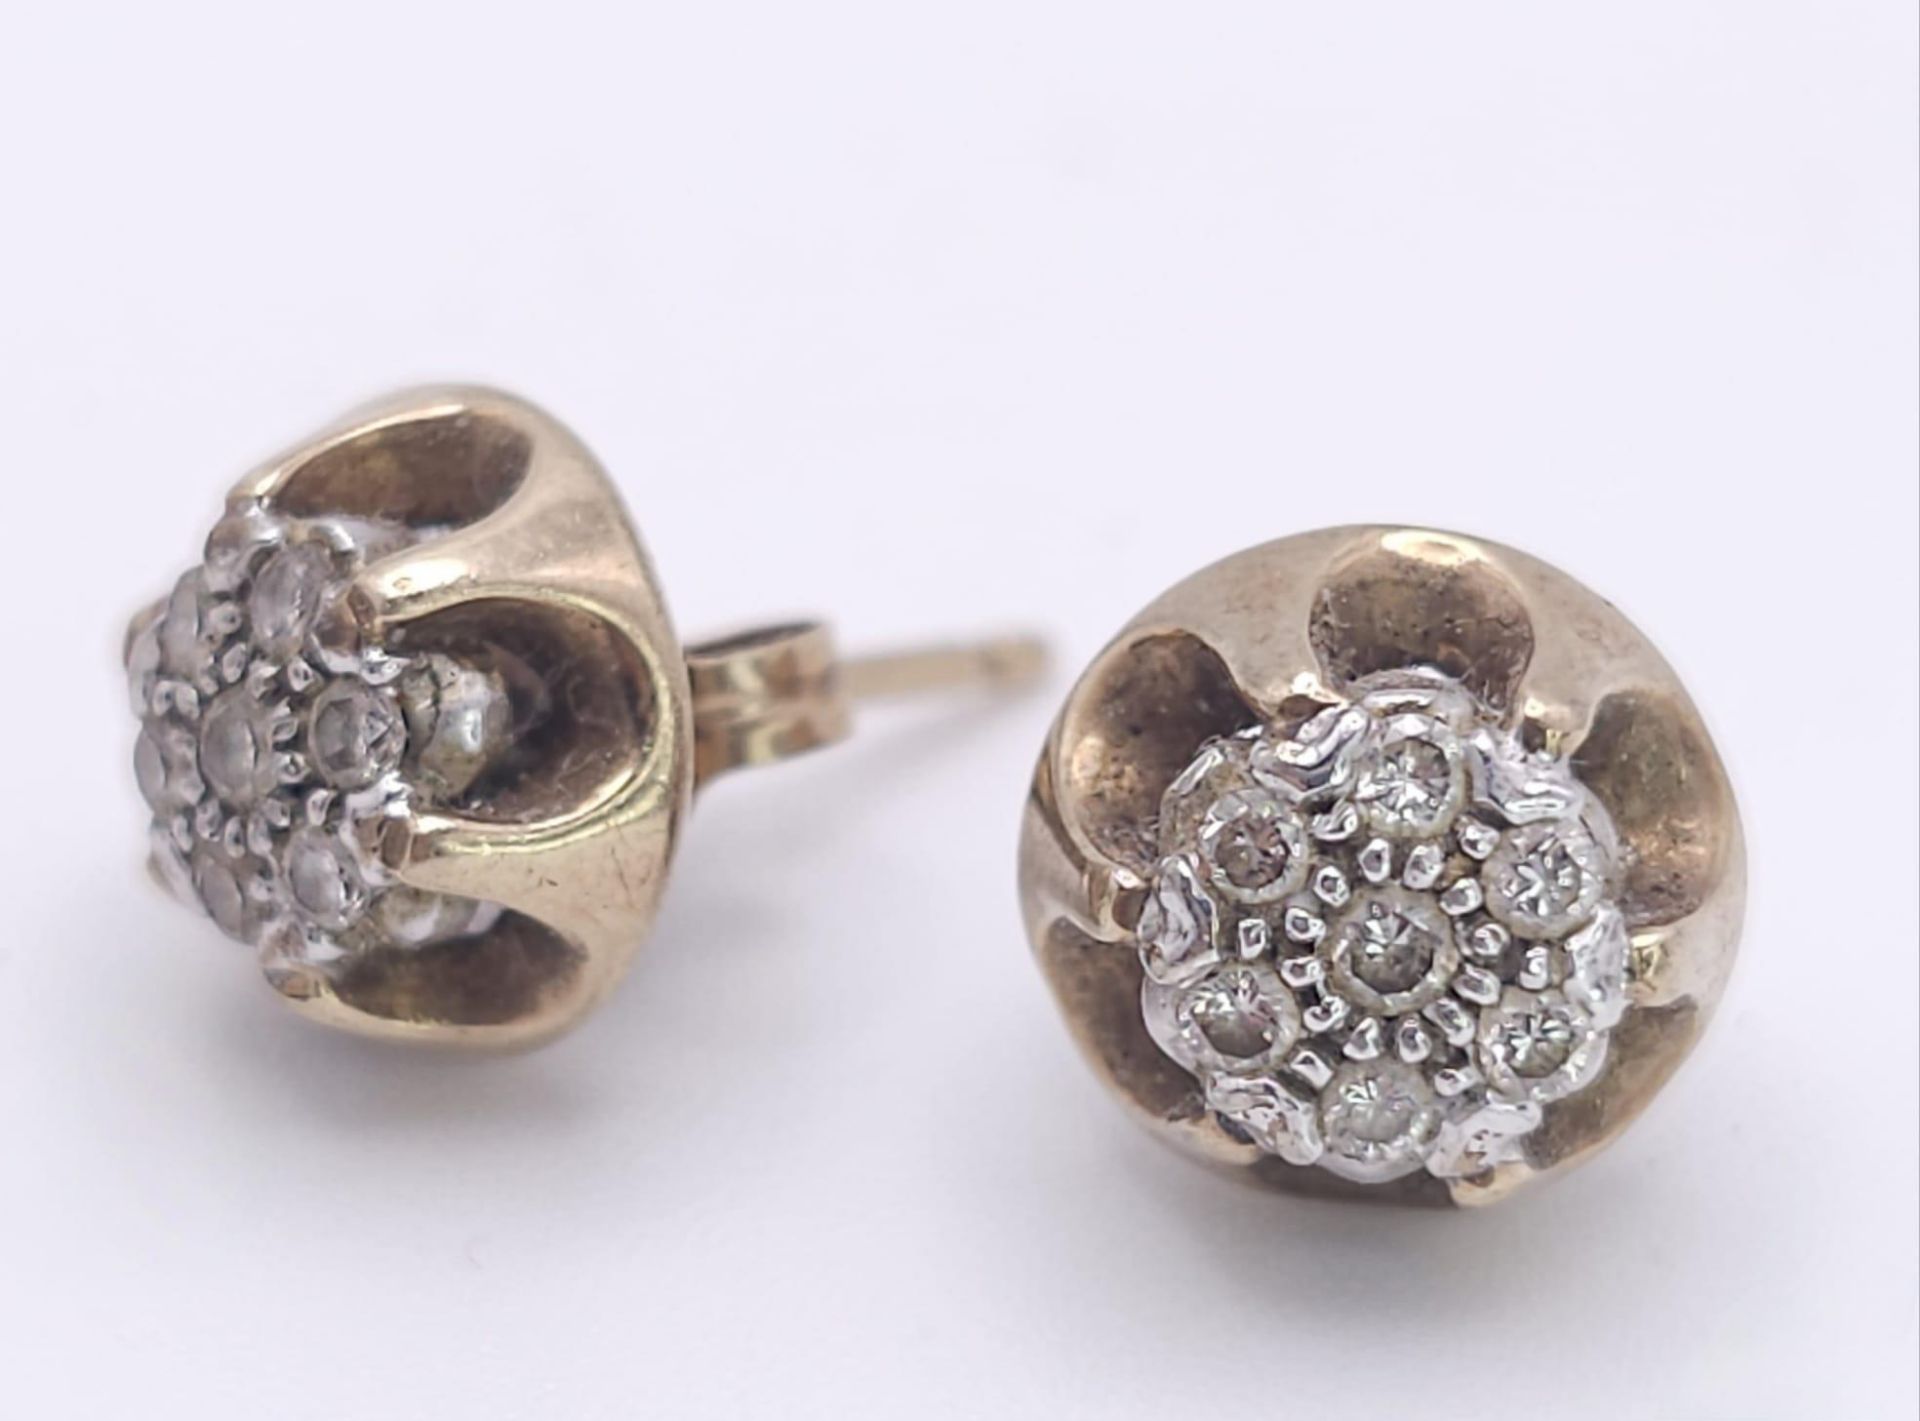 A Pair of Vintage 9K Yellow Gold and Diamond Stud Earrings. 3.3g total weight.